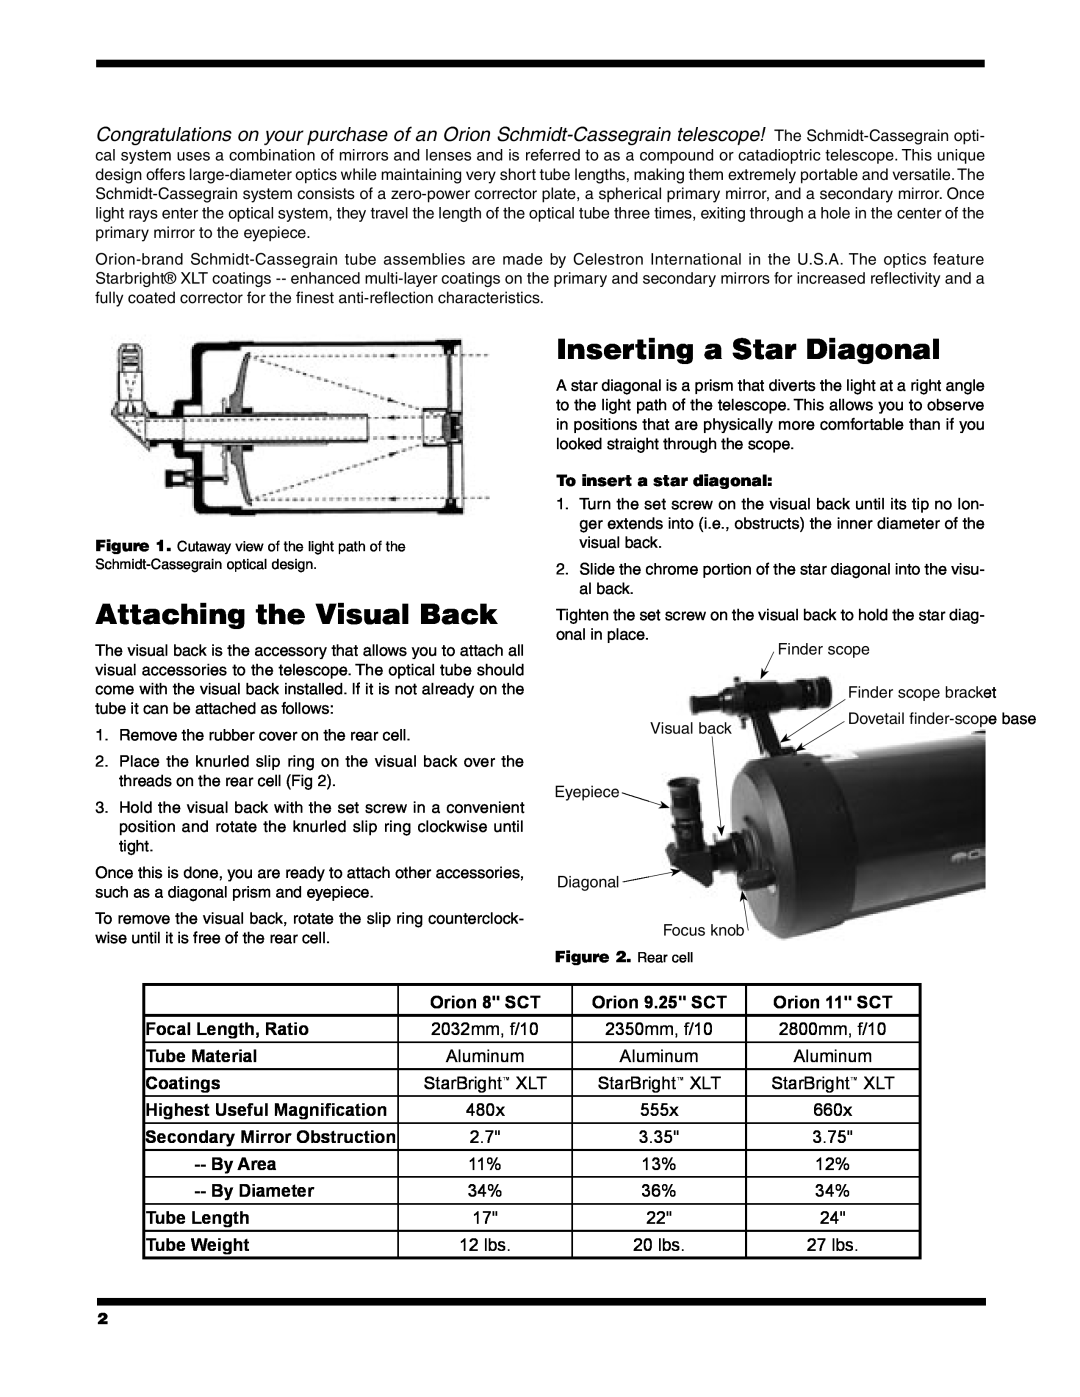 Orion Telescope instruction manual Unpacking Your Scope, Attaching the Visual Back, Inserting a Star Diagonal 